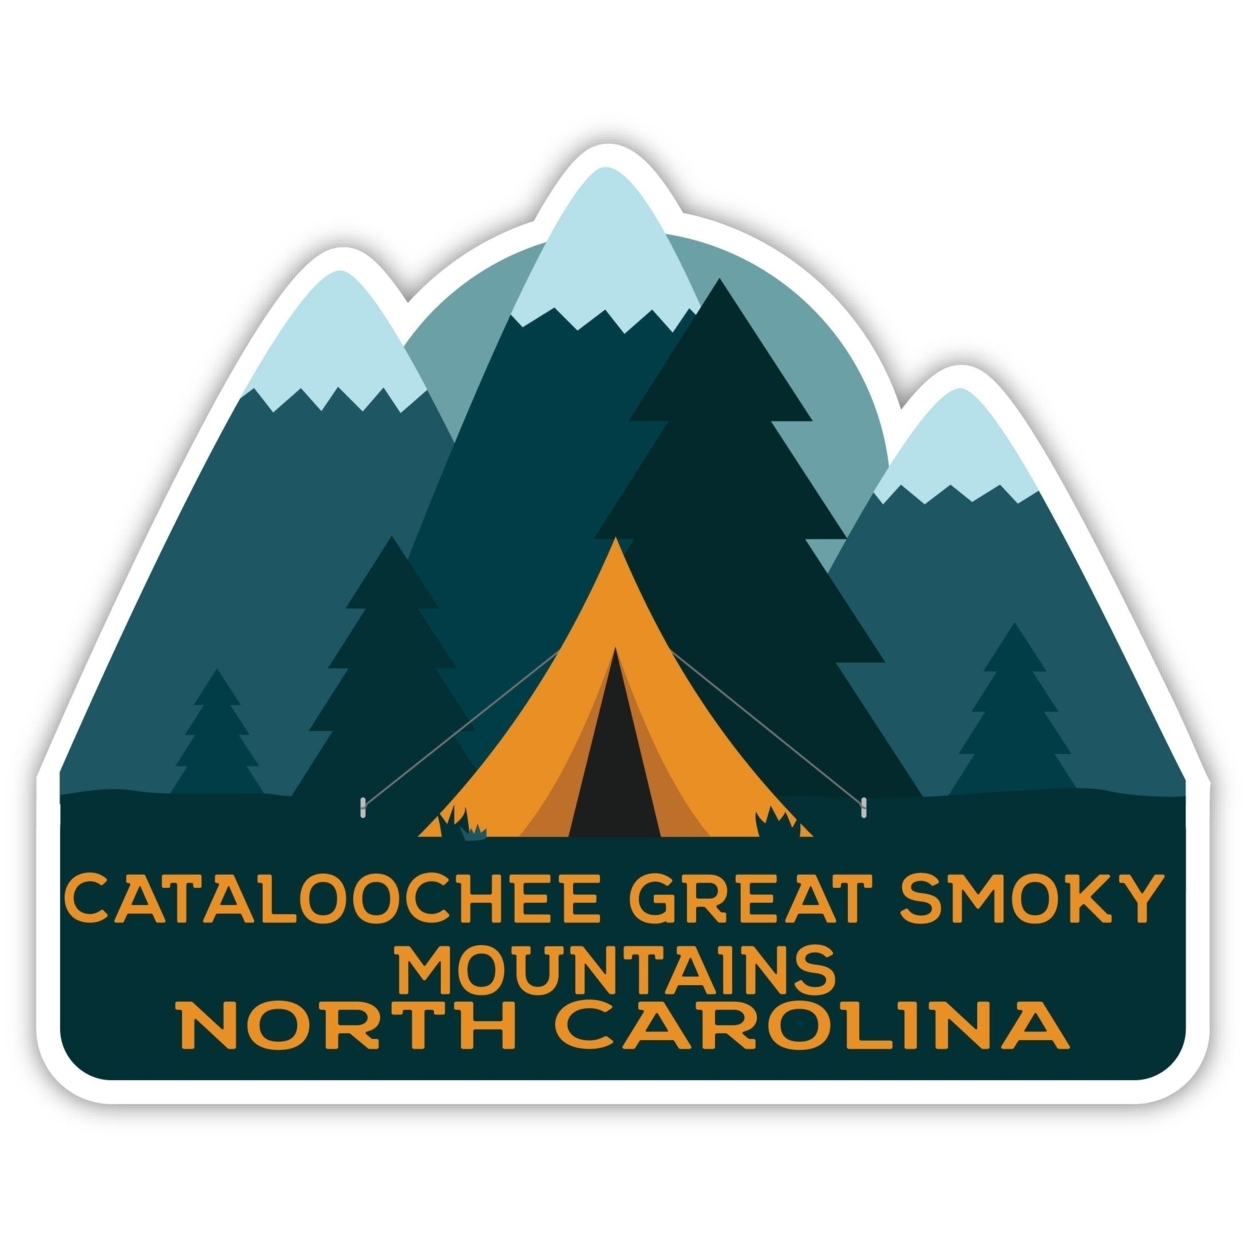 Cataloochee Great Smoky Mountains North Carolina Souvenir Decorative Stickers (Choose Theme And Size) - 4-Pack, 8-Inch, Tent